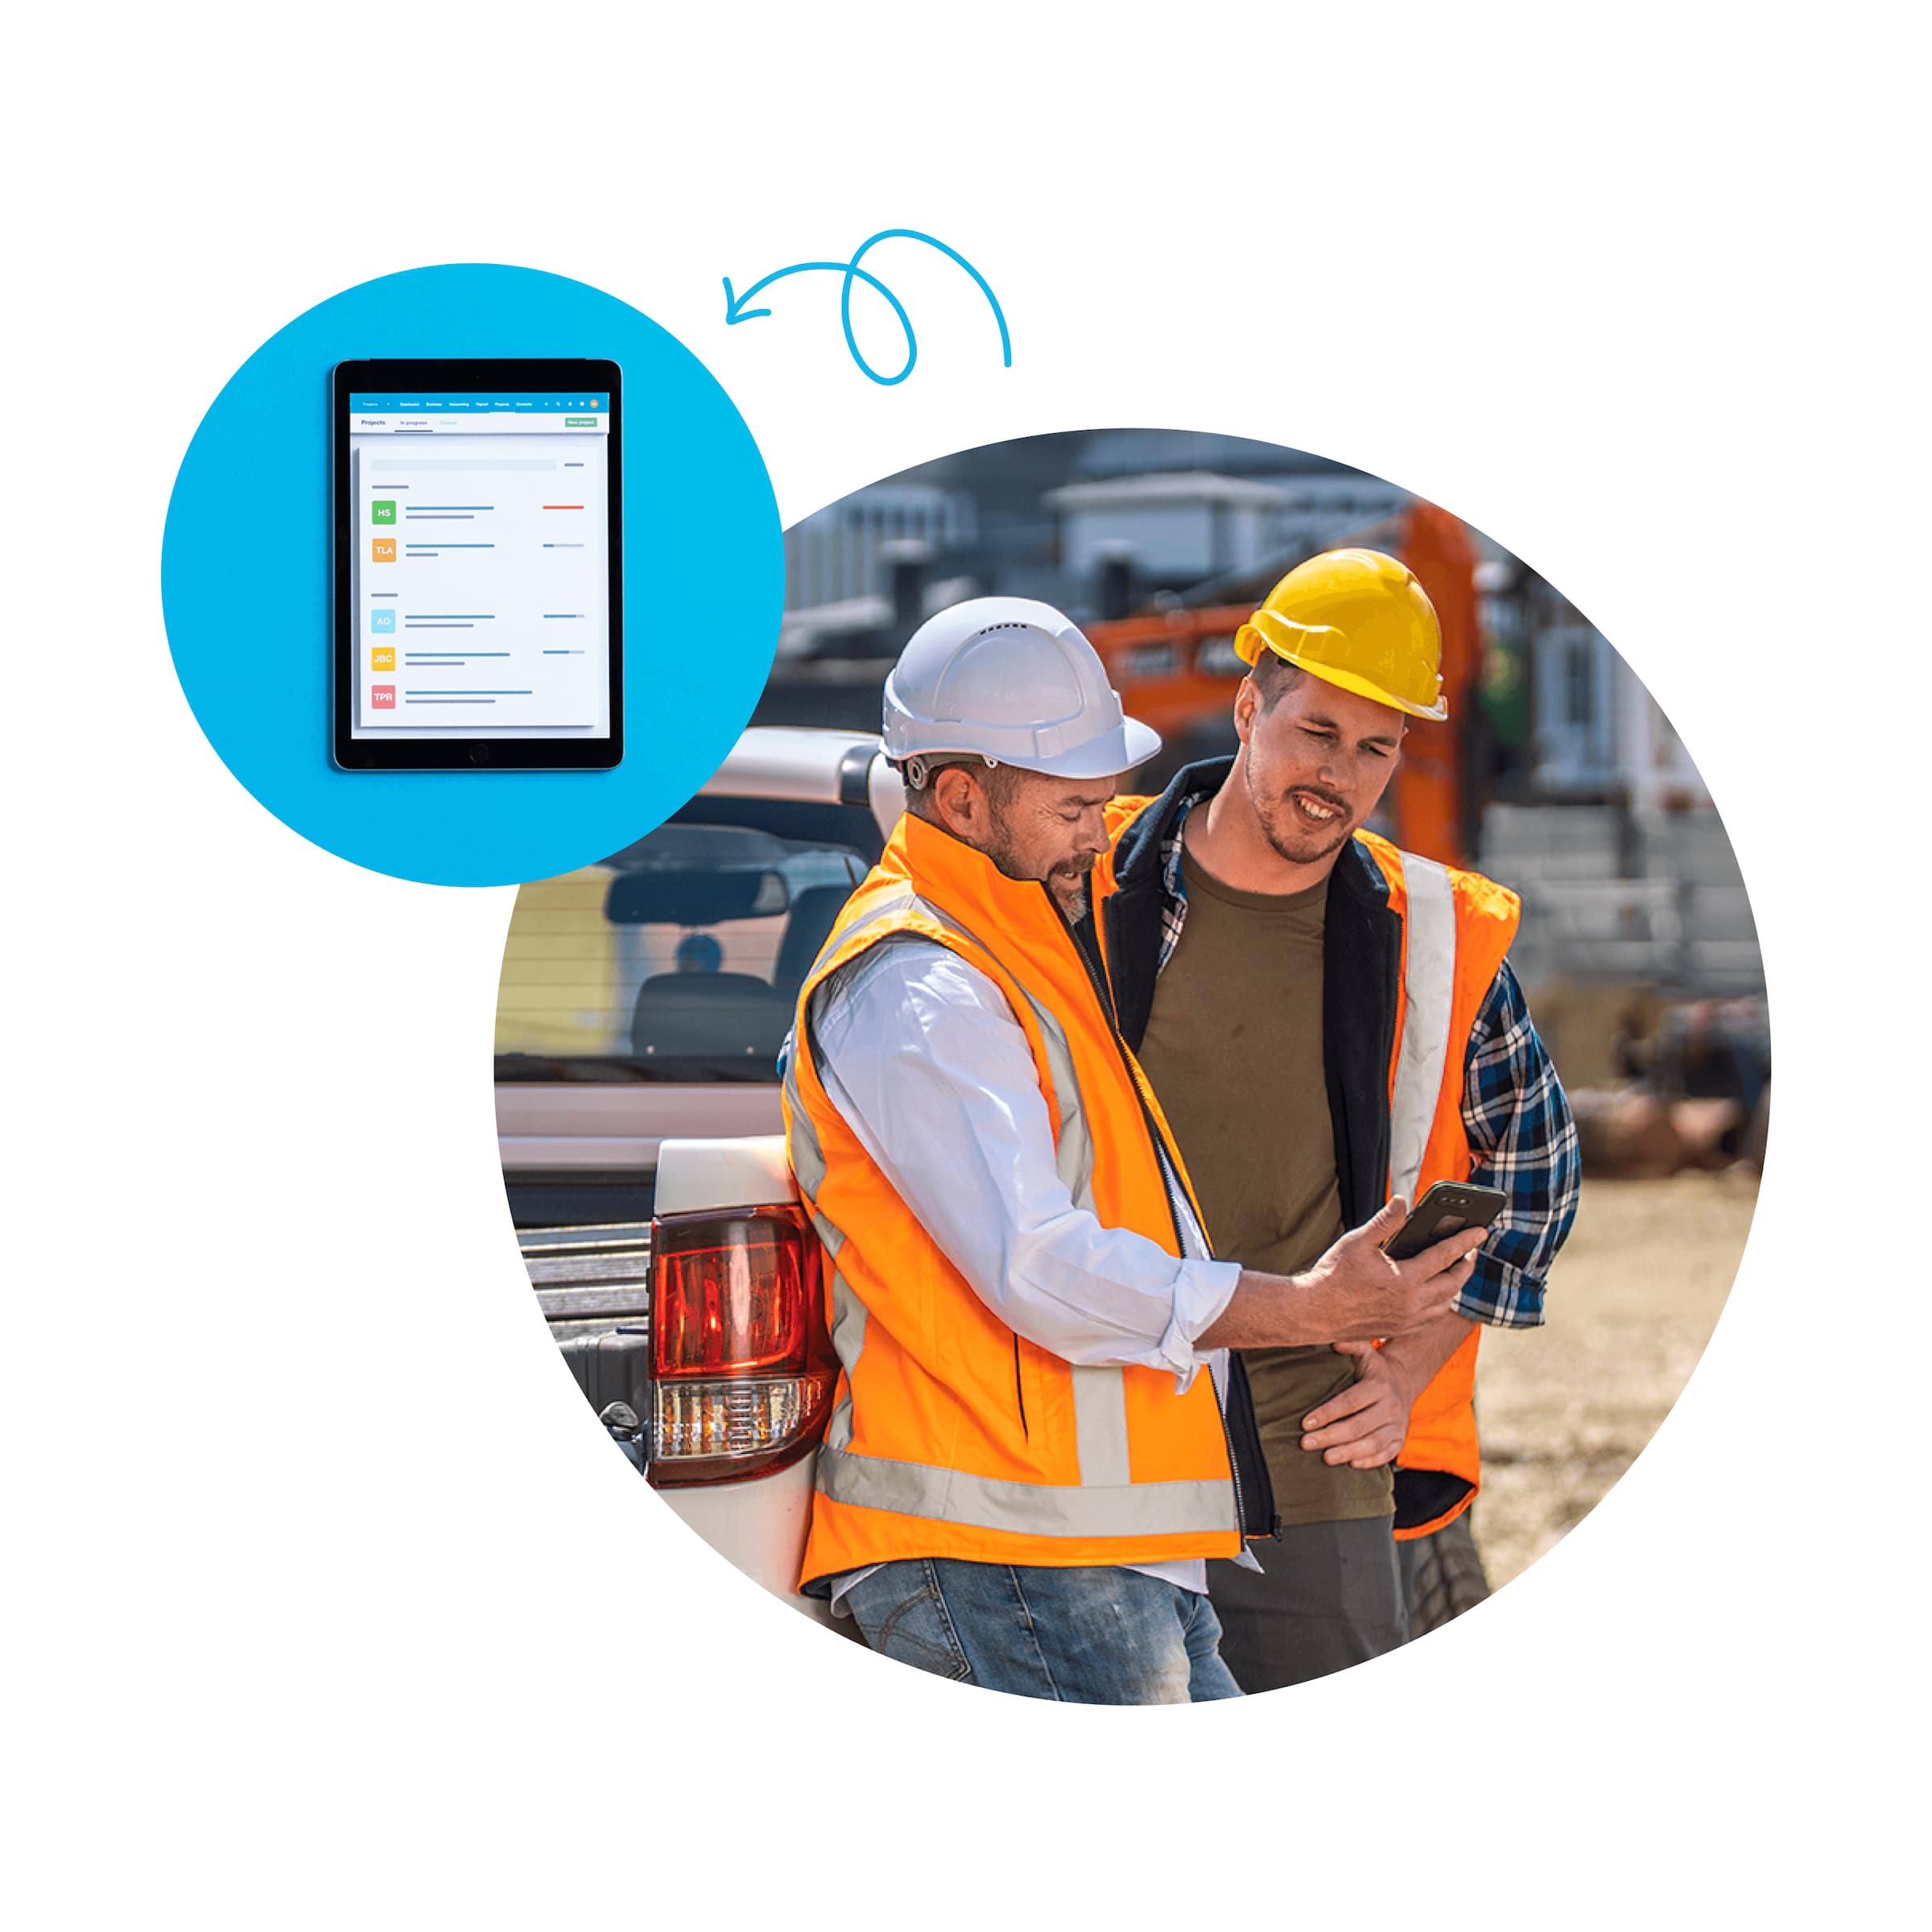 Two workers at a construction site wearing hard hats check costs using their job costing software on a mobile device.